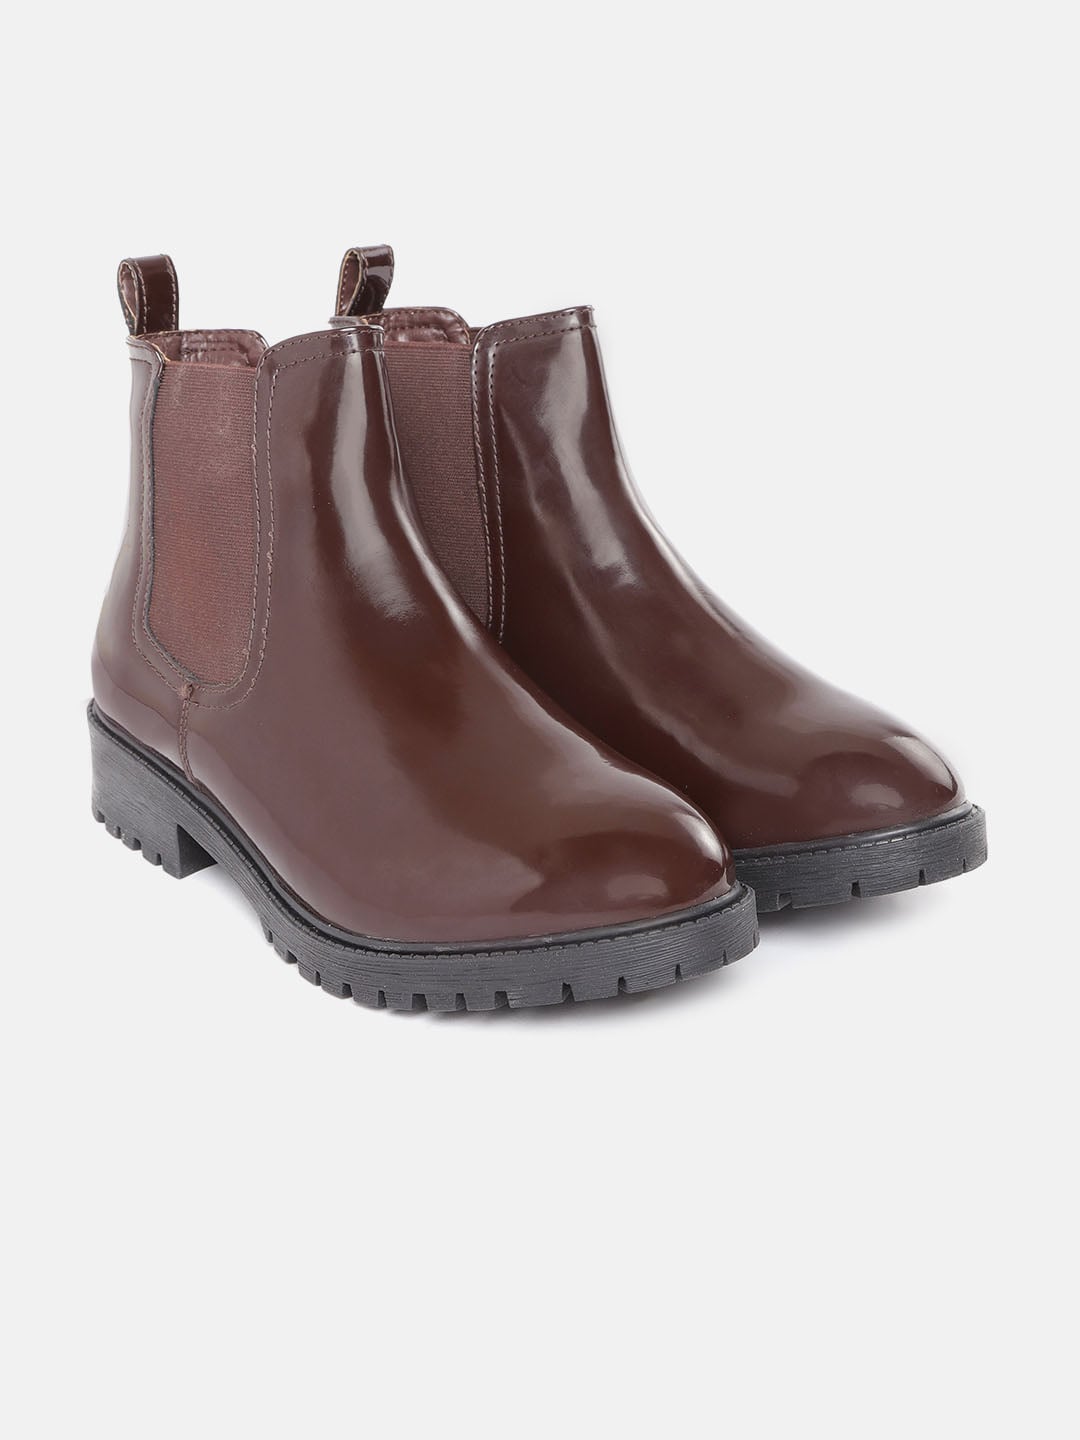 DressBerry Women Burgundy Mid-Top Patent Finish Chelsea Boots Price in India